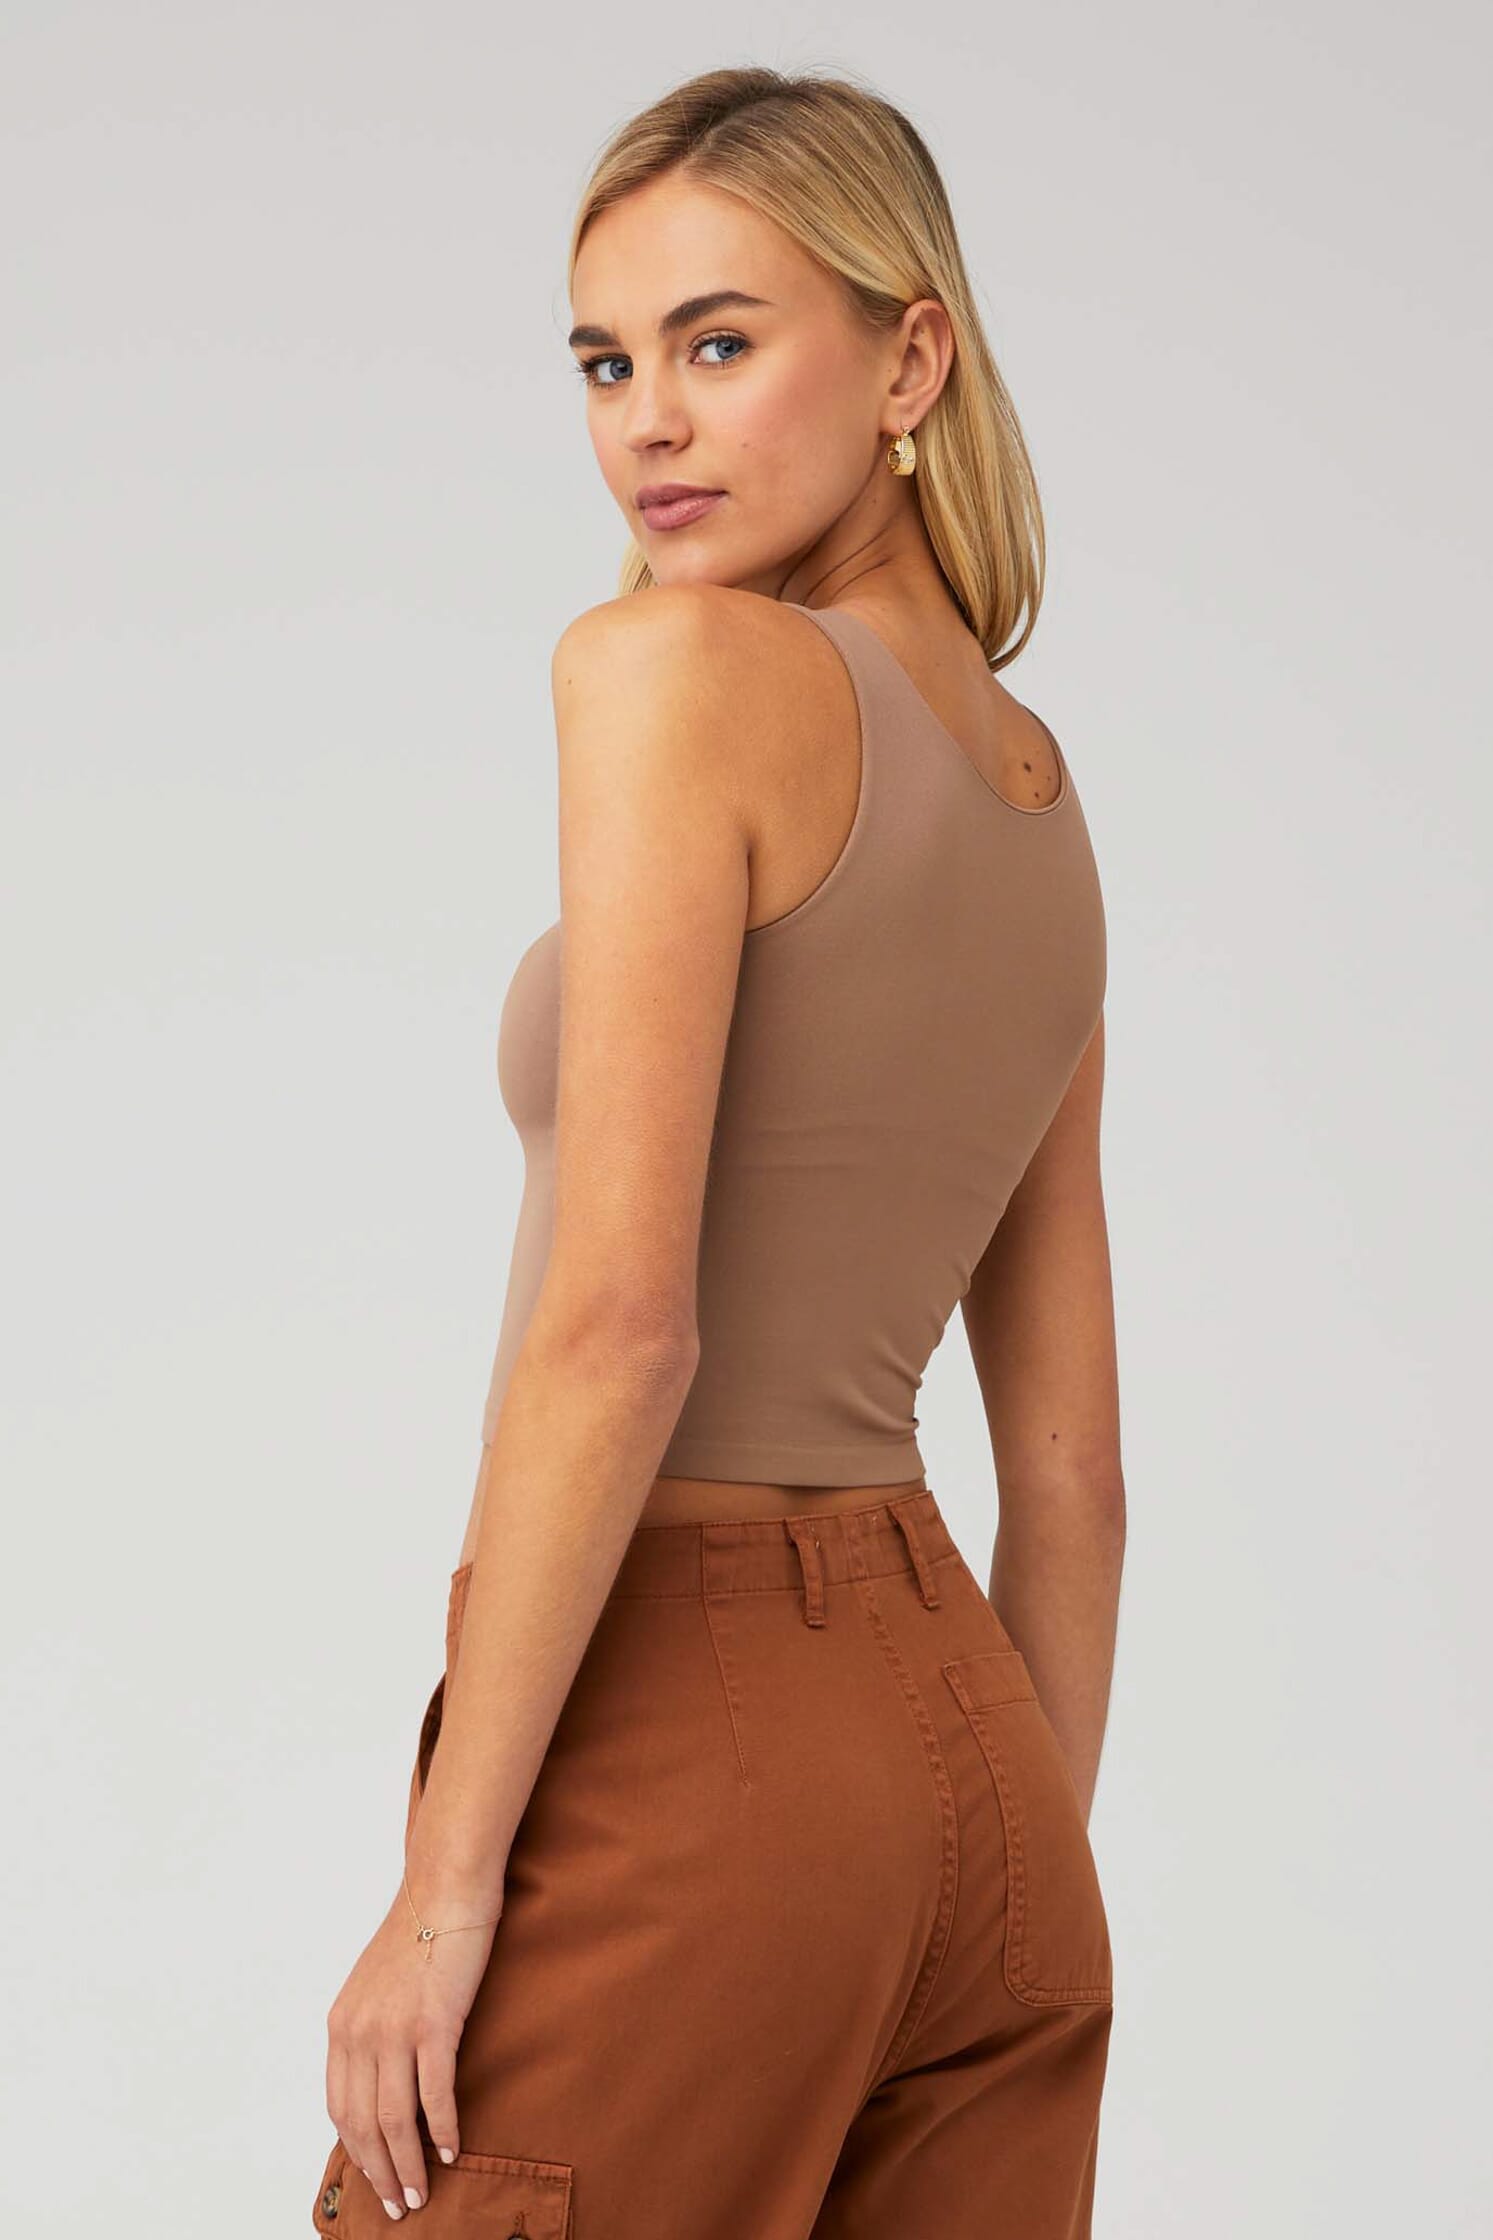 https://images.fashionpass.com/products/clean-lines-cami-free-people-strawberry-f75-3.jpg?profile=a